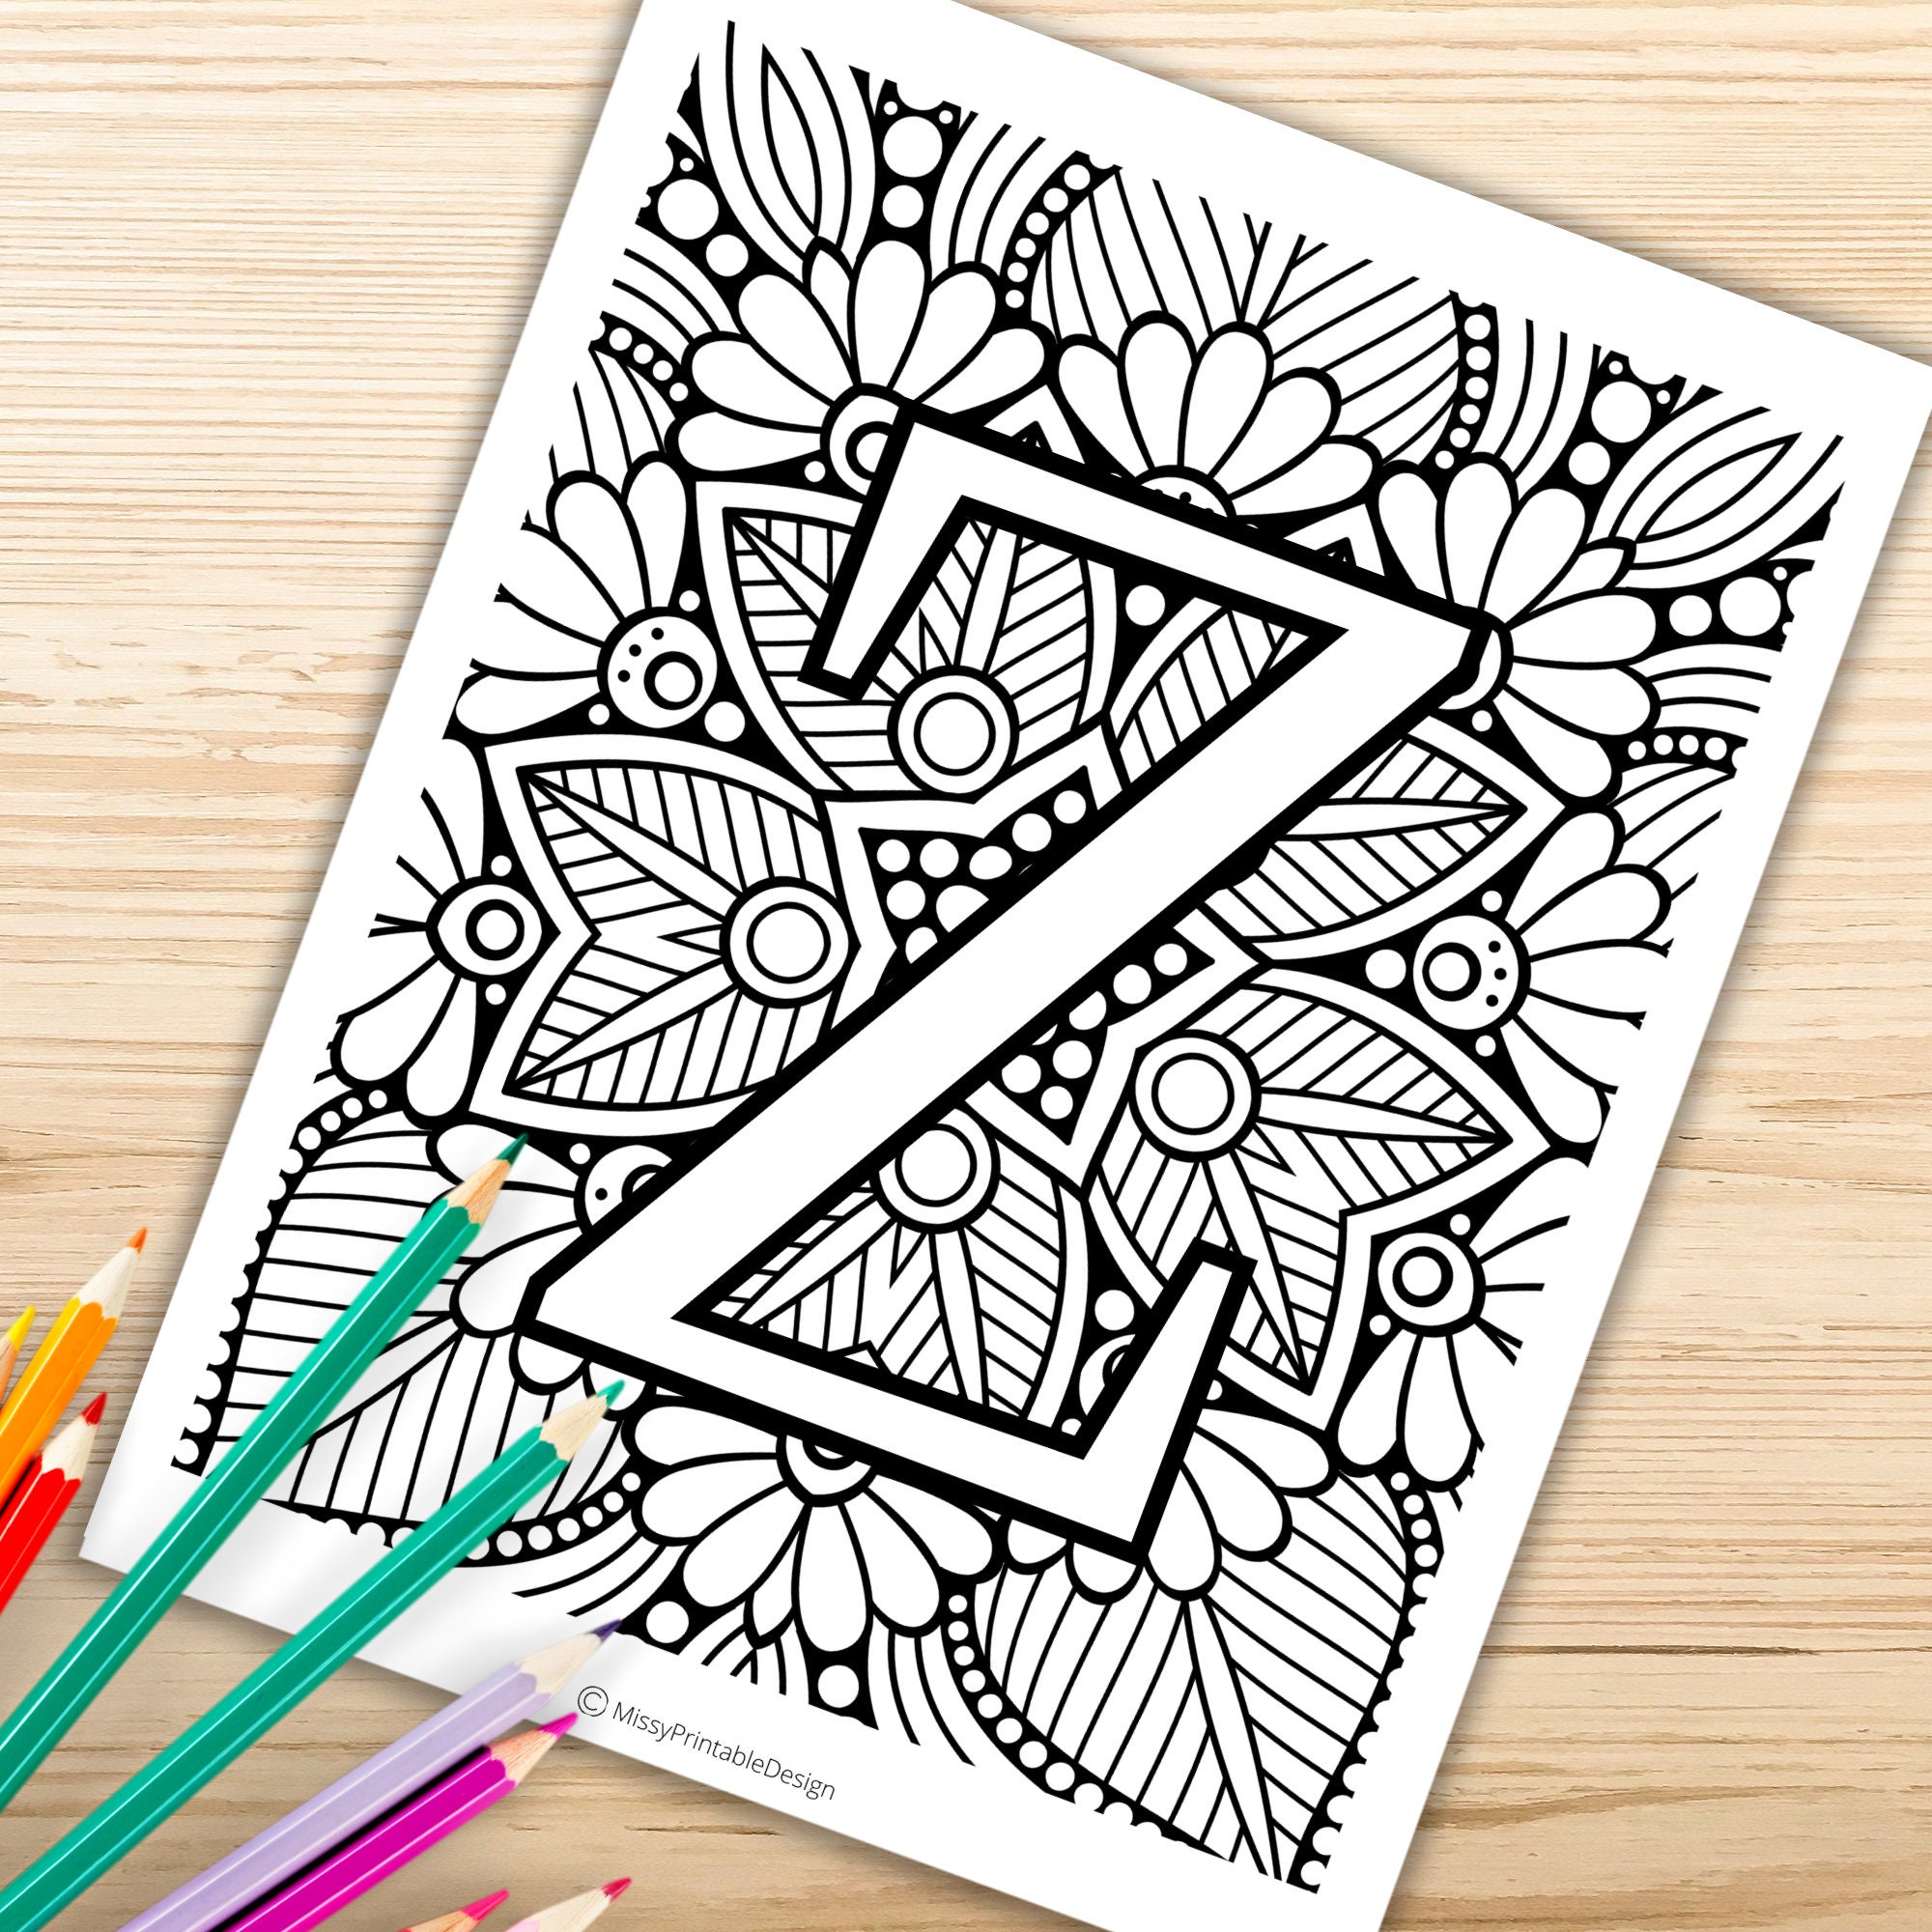 Mandala Alphabet Letters Coloring Pages Printable Adult | Etsy